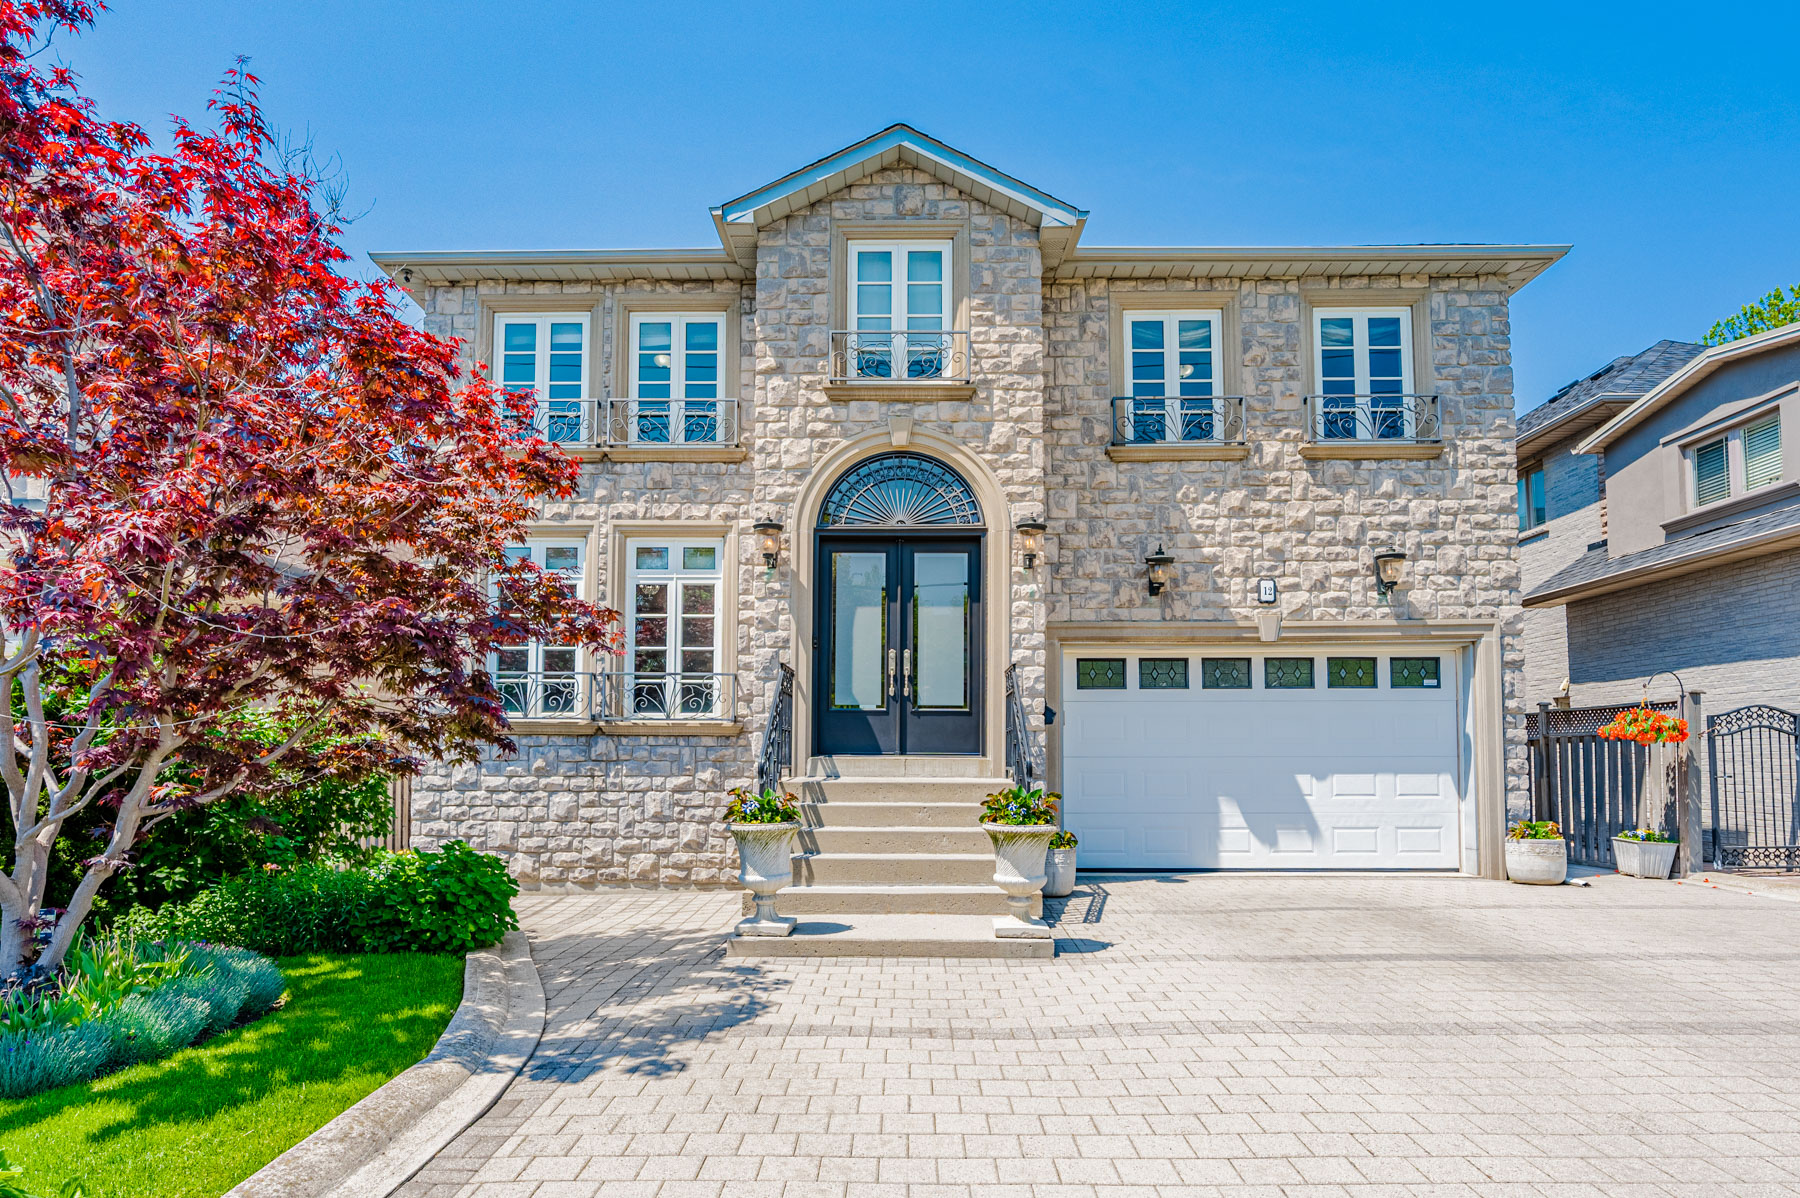 12 Highland Hill gray stone exterior with paved driveway and 2 car garage.